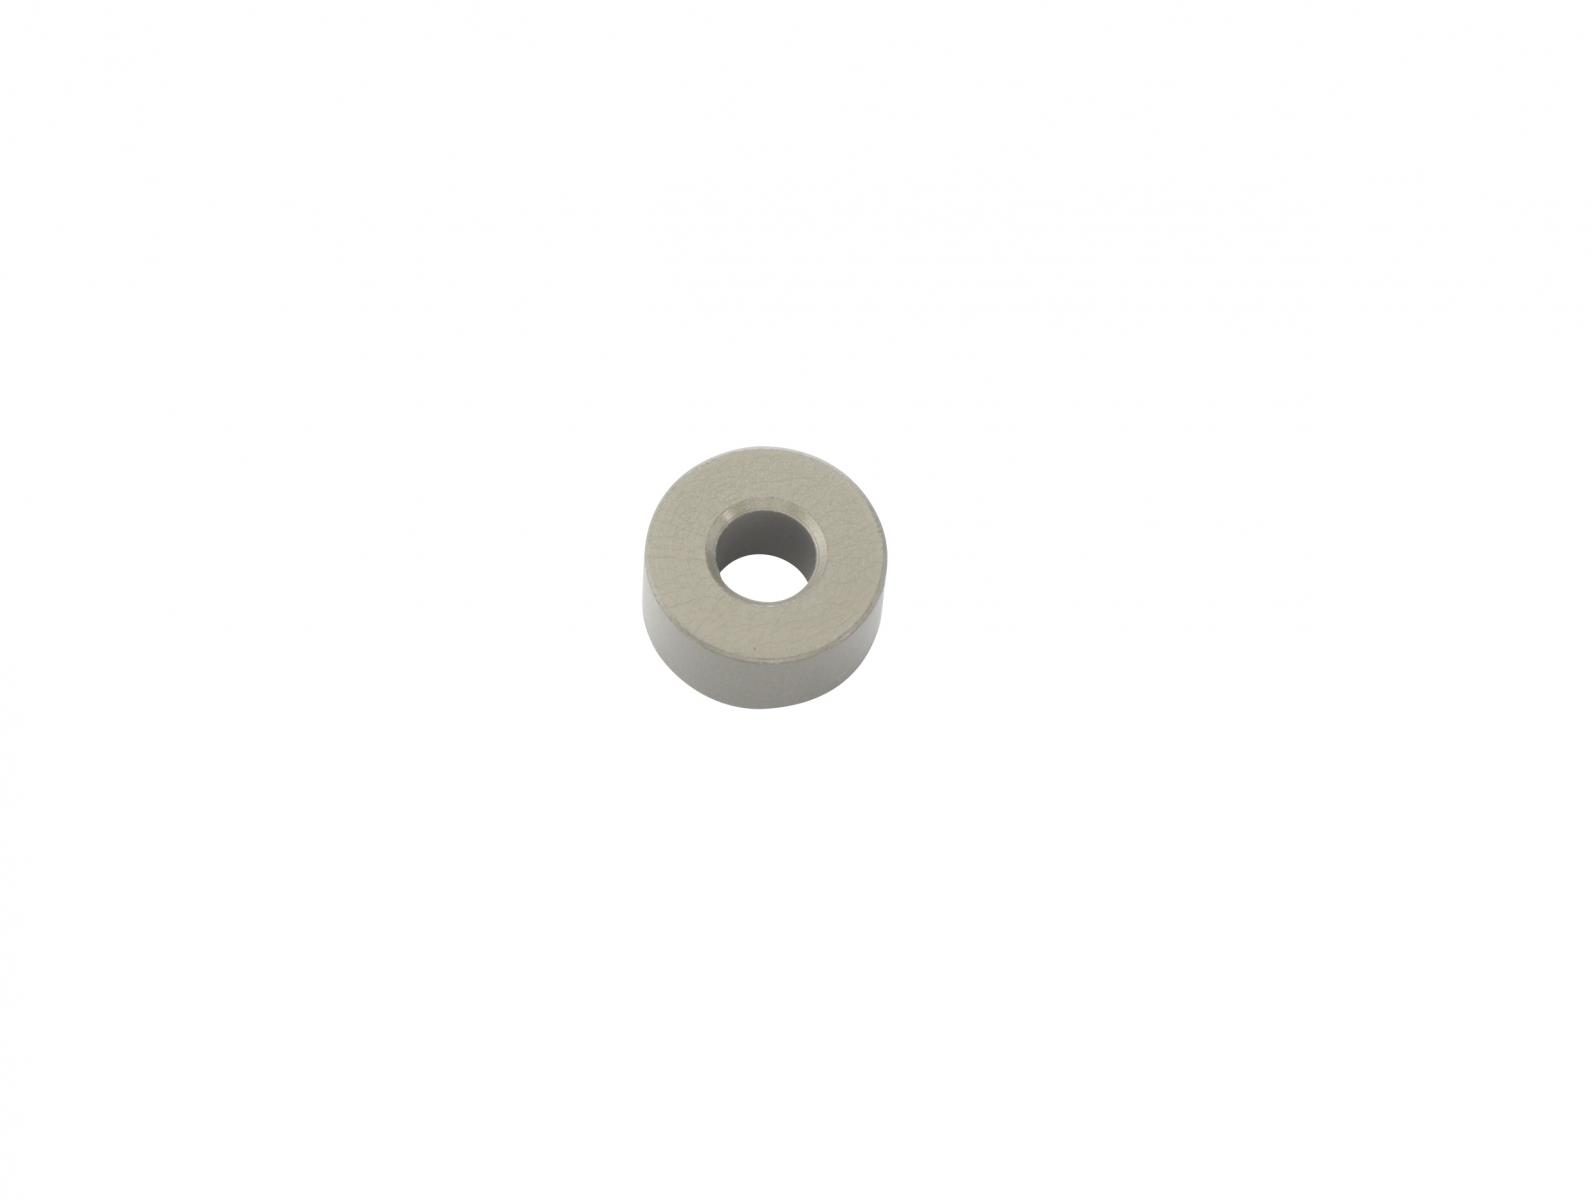 TapeTech® Spacer. Part number 152025